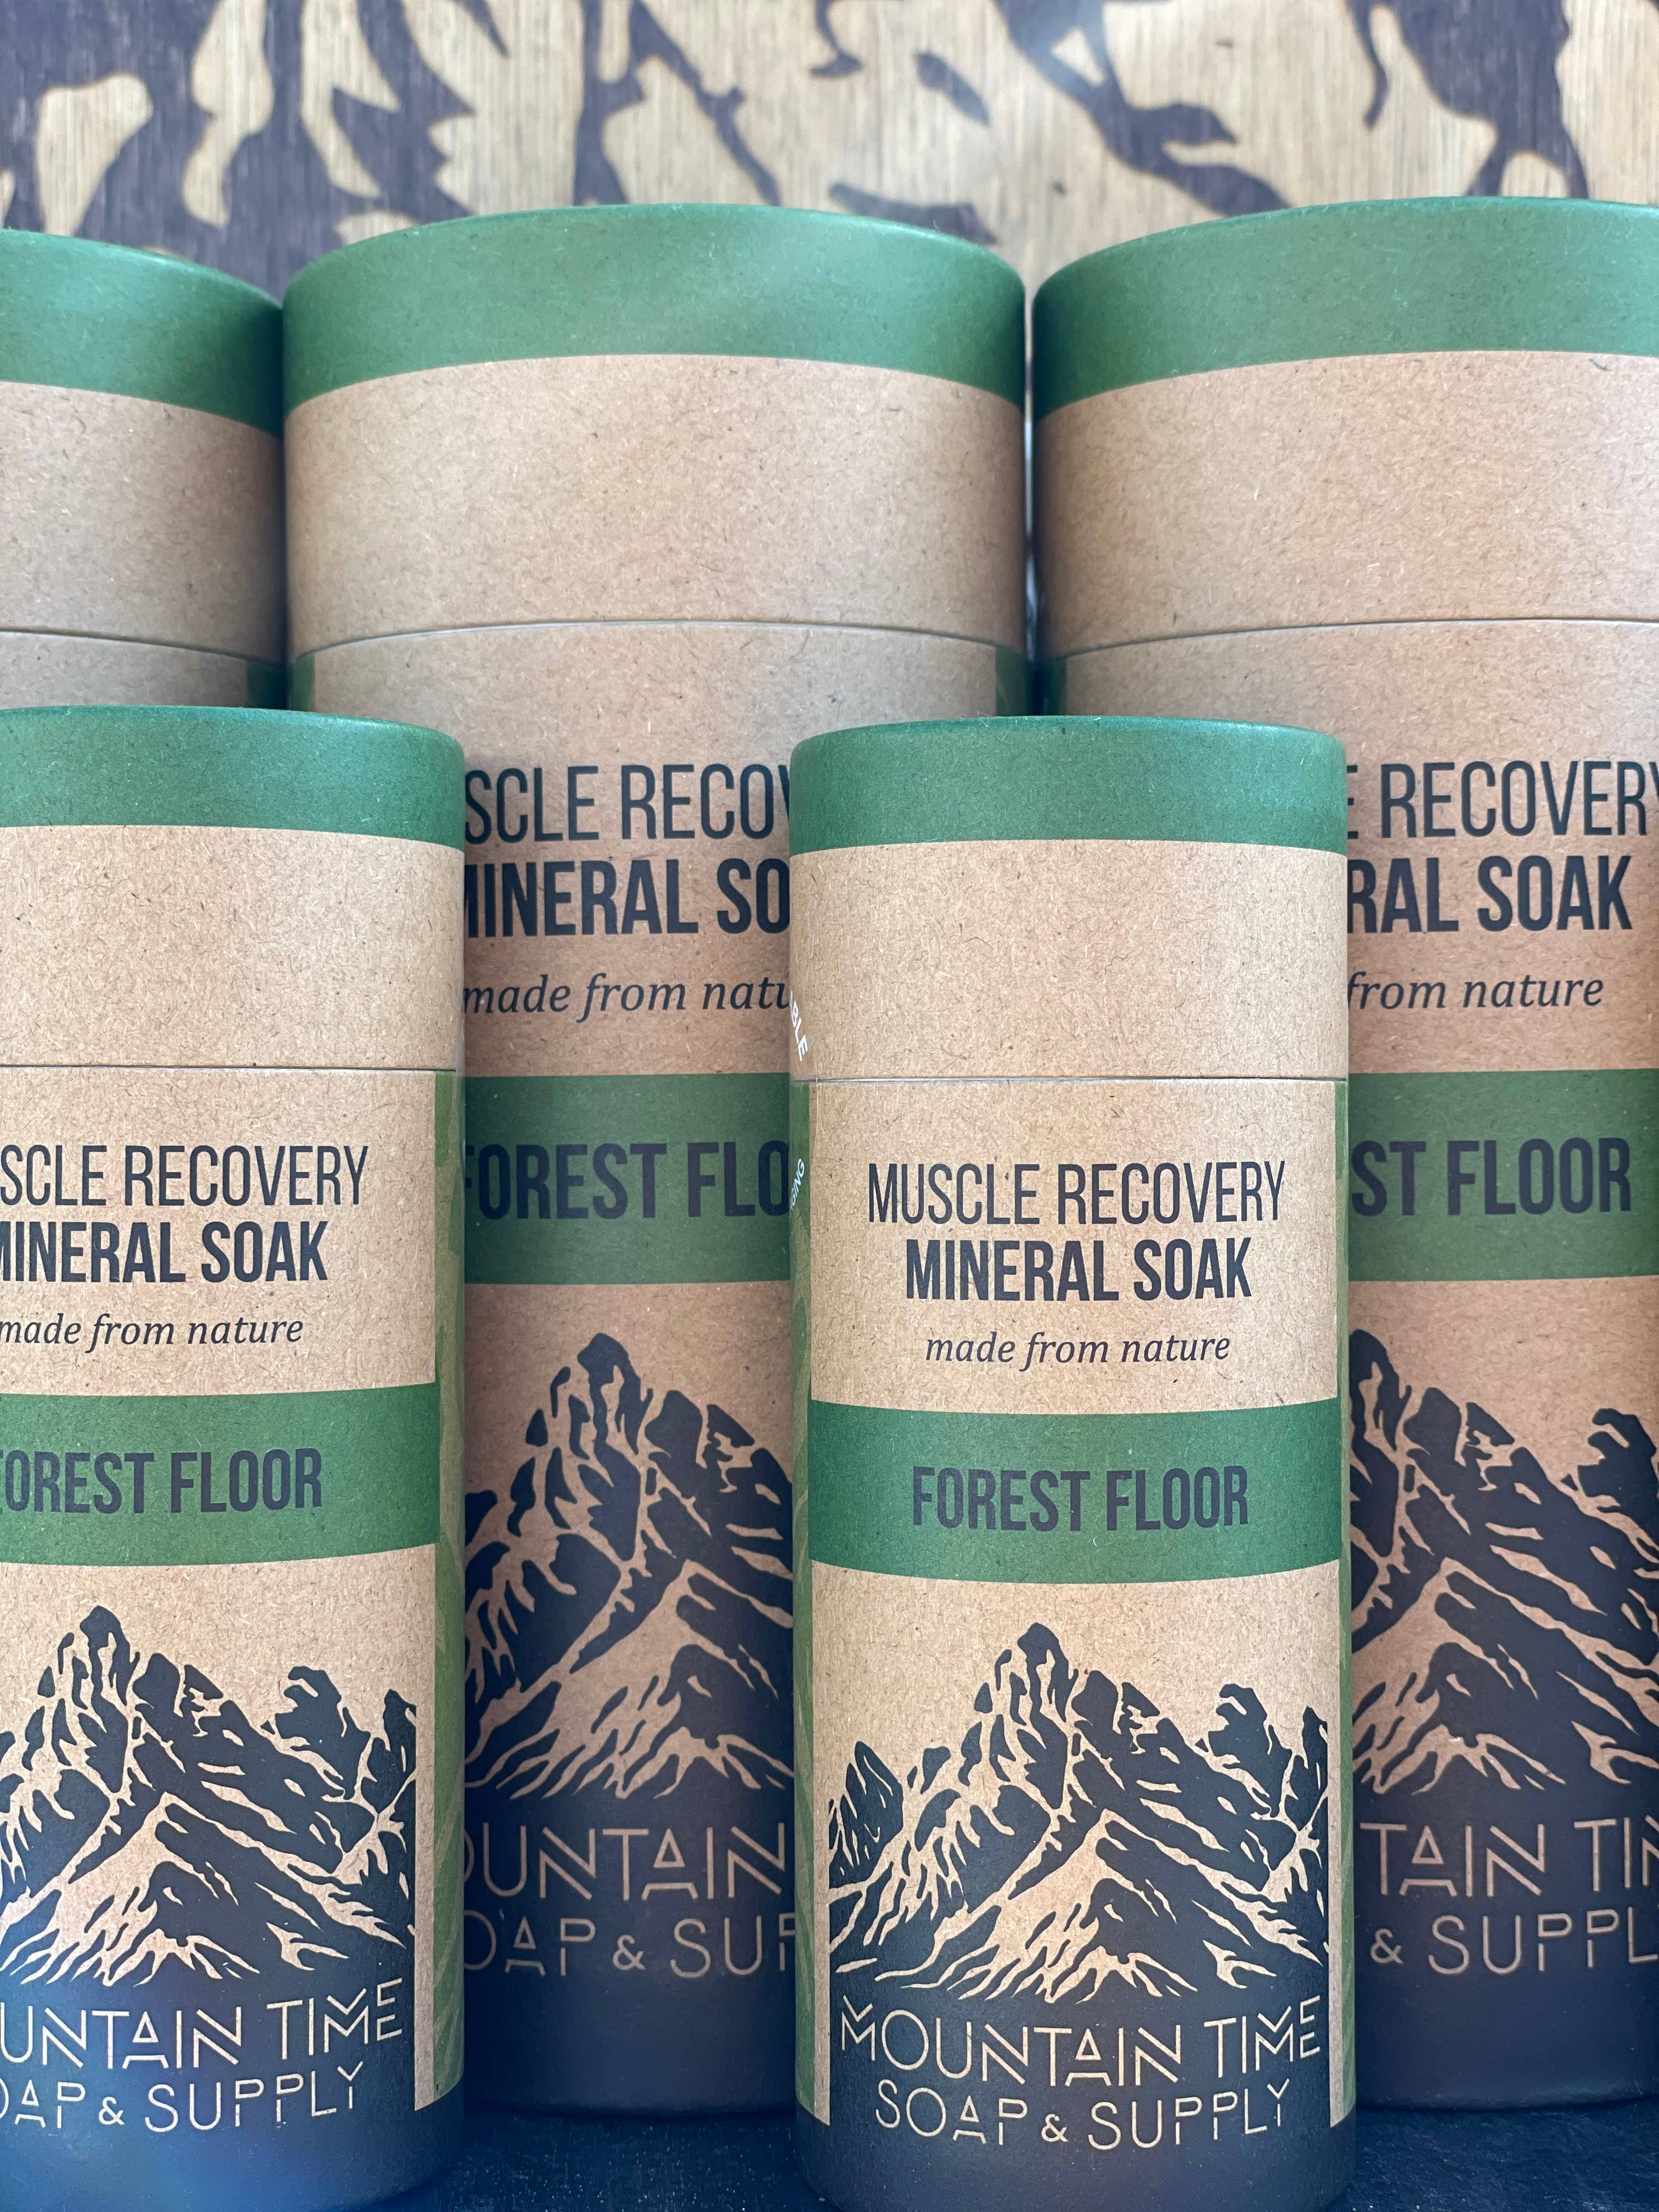 Muscle Recovery Mineral Soak - Large 21 oz.: Forest Floor